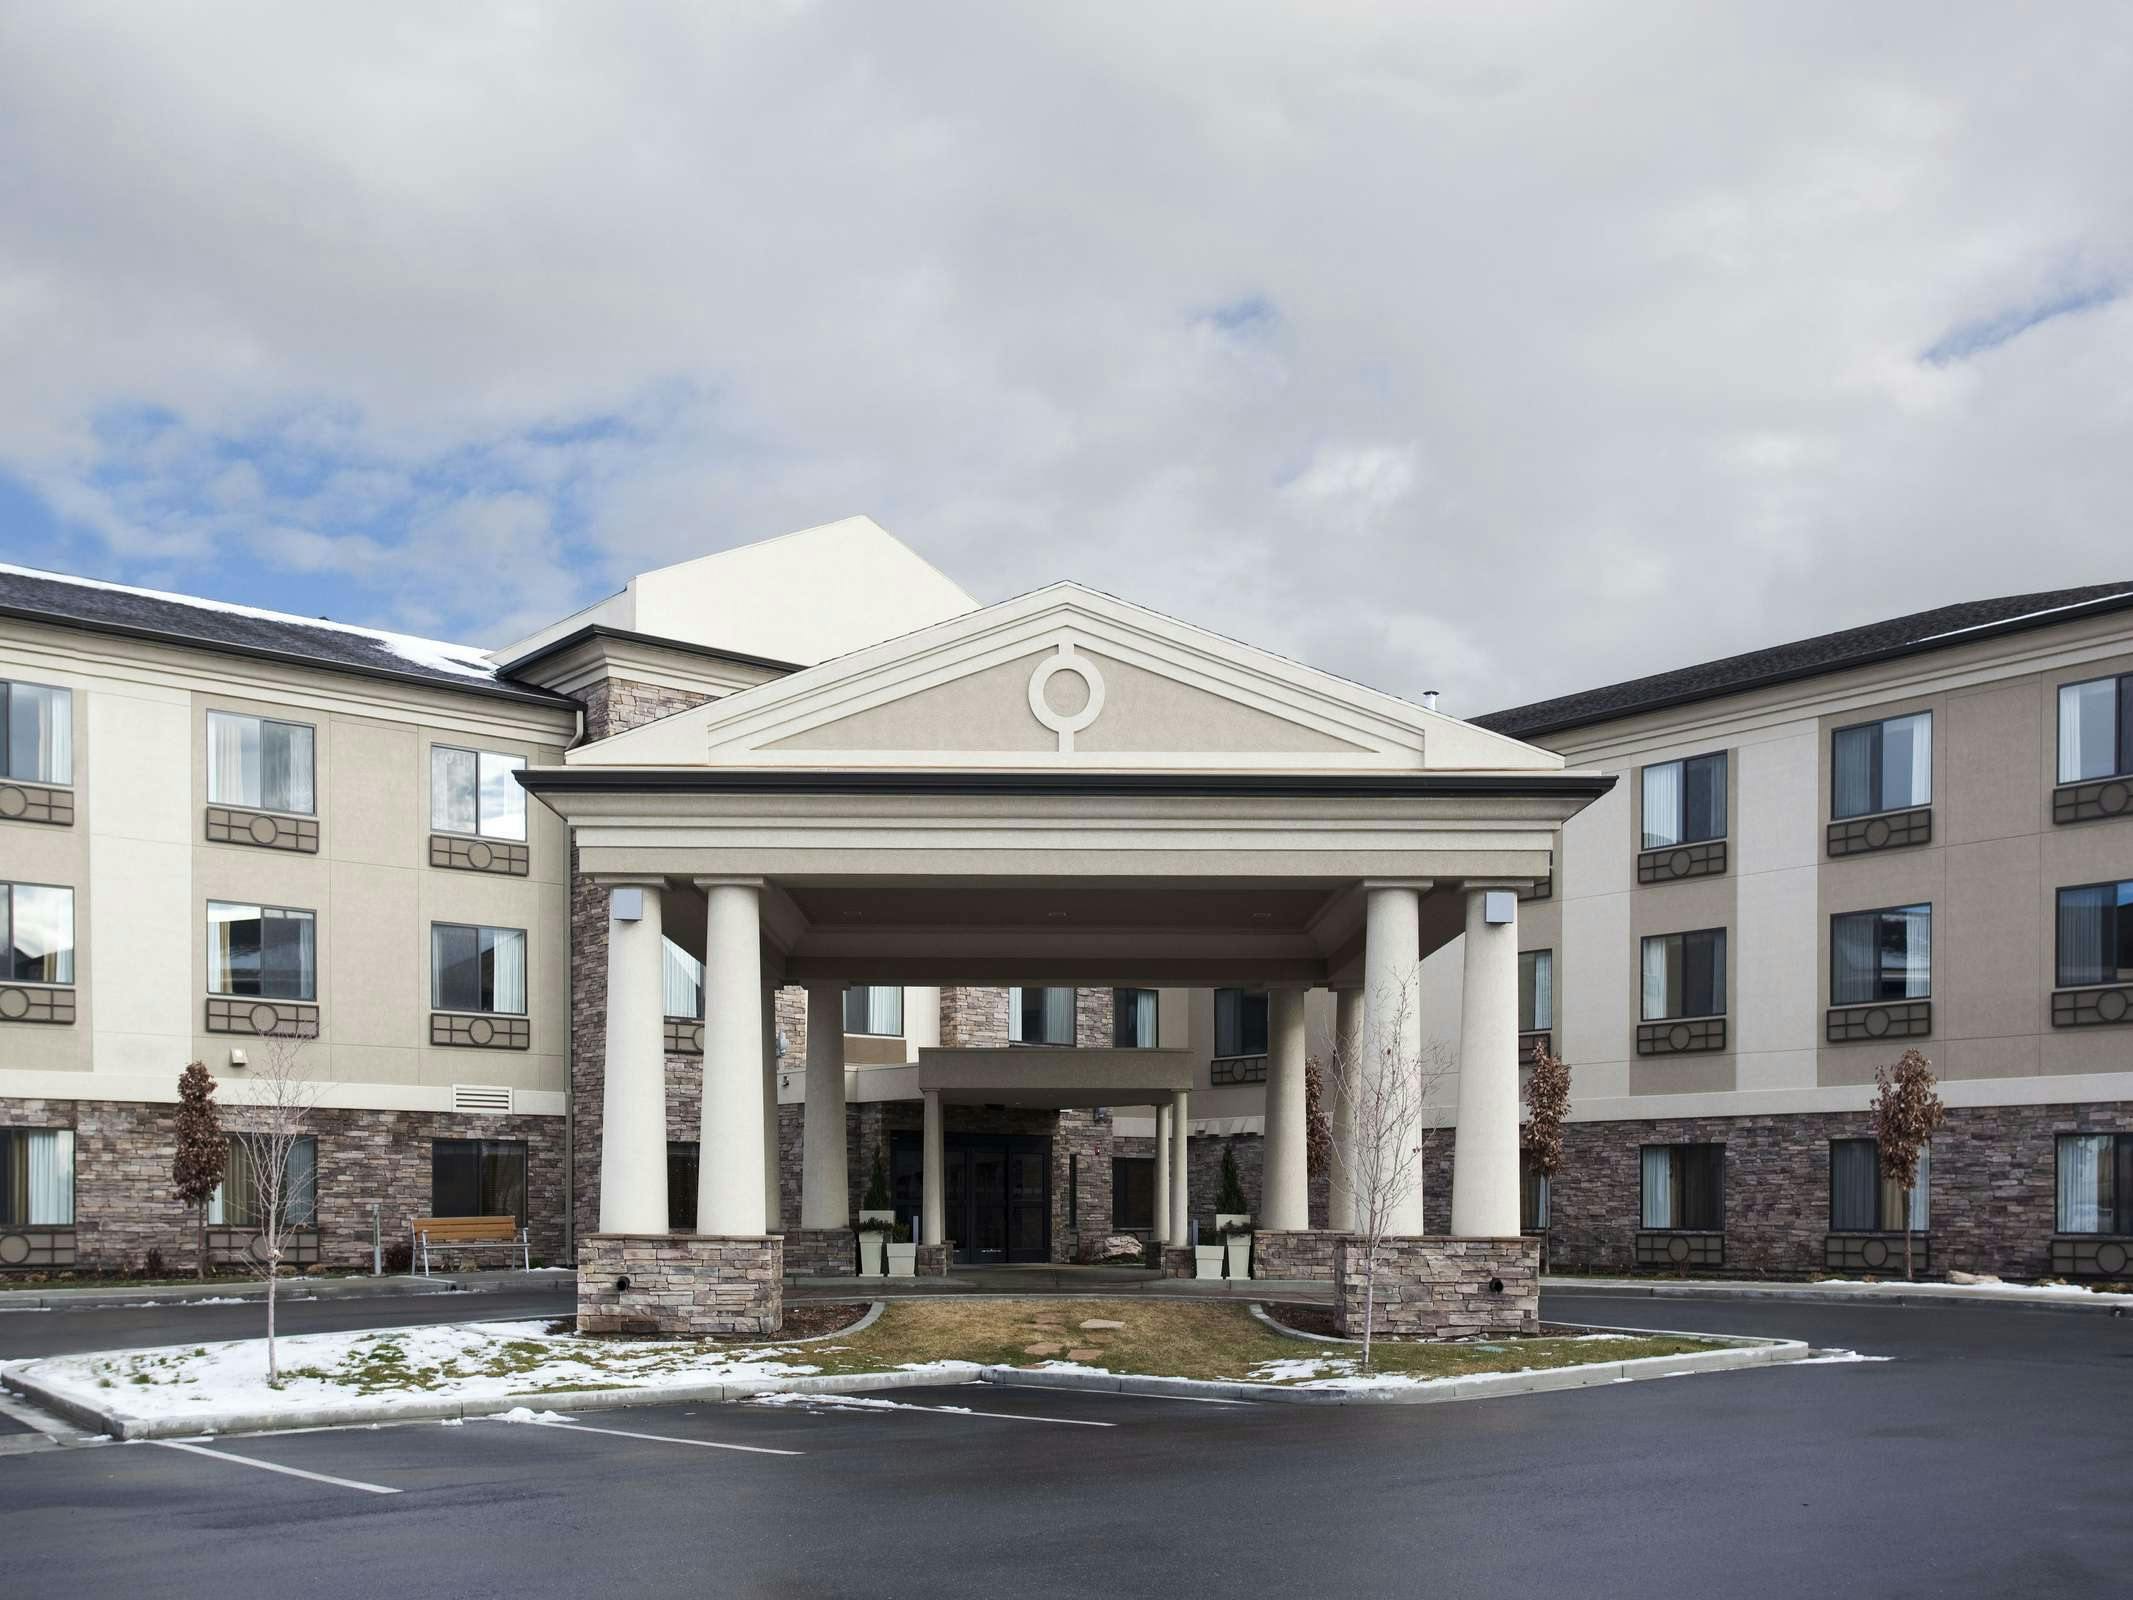 holiday inn express & suites salt lake city-airport east airport shuttle